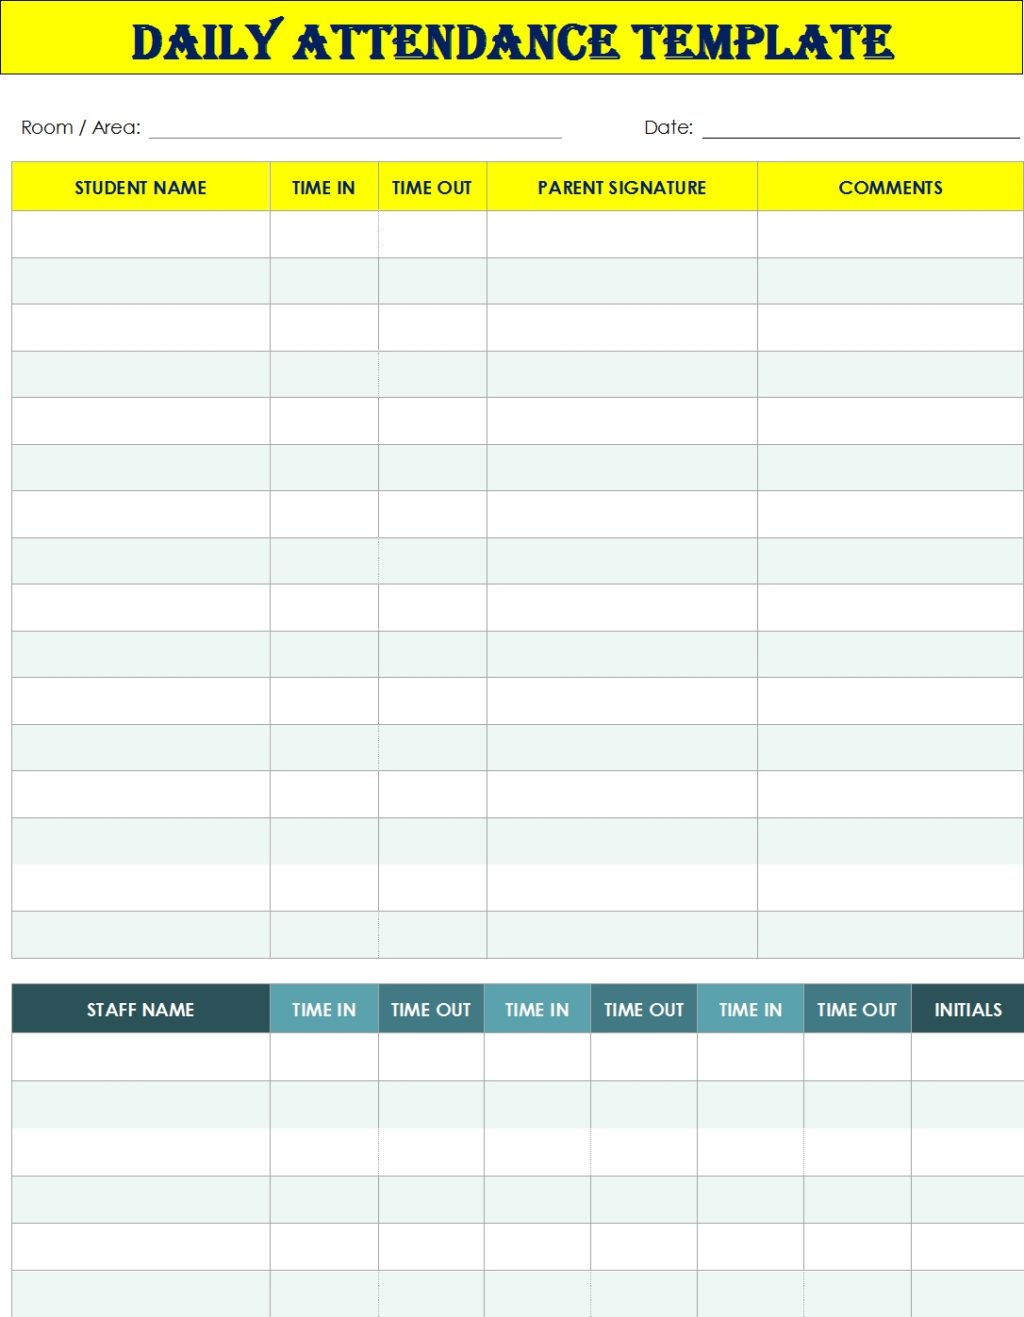 Daily Attendance Report Template - Free Report Templates